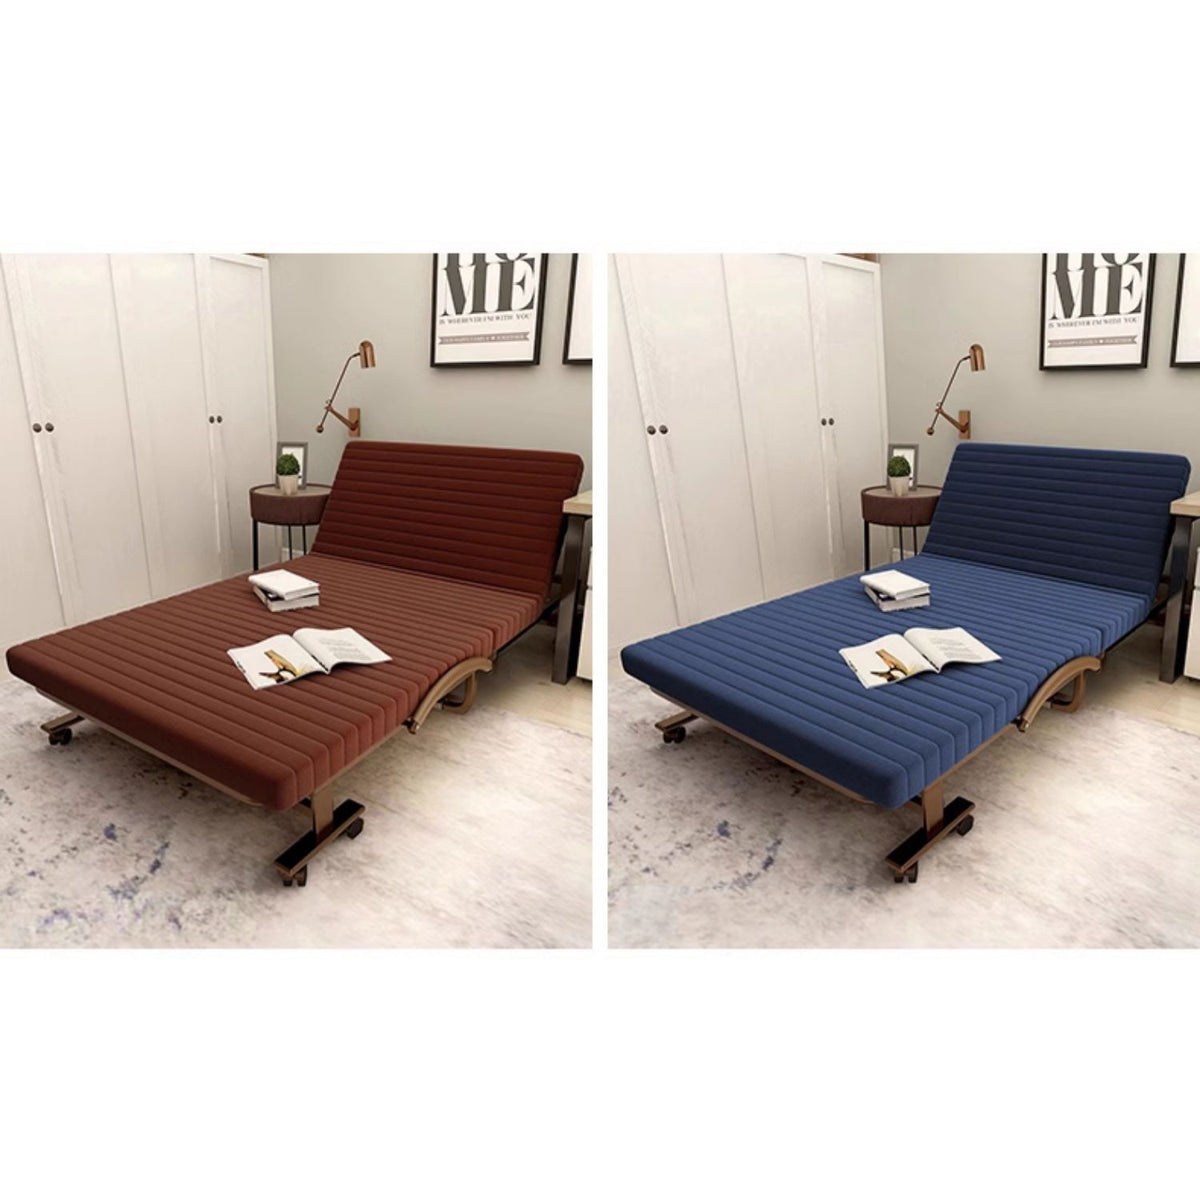 Luxurious Light Blue and Orange Beige Coir and Leathaire Bed Set fyj-1251